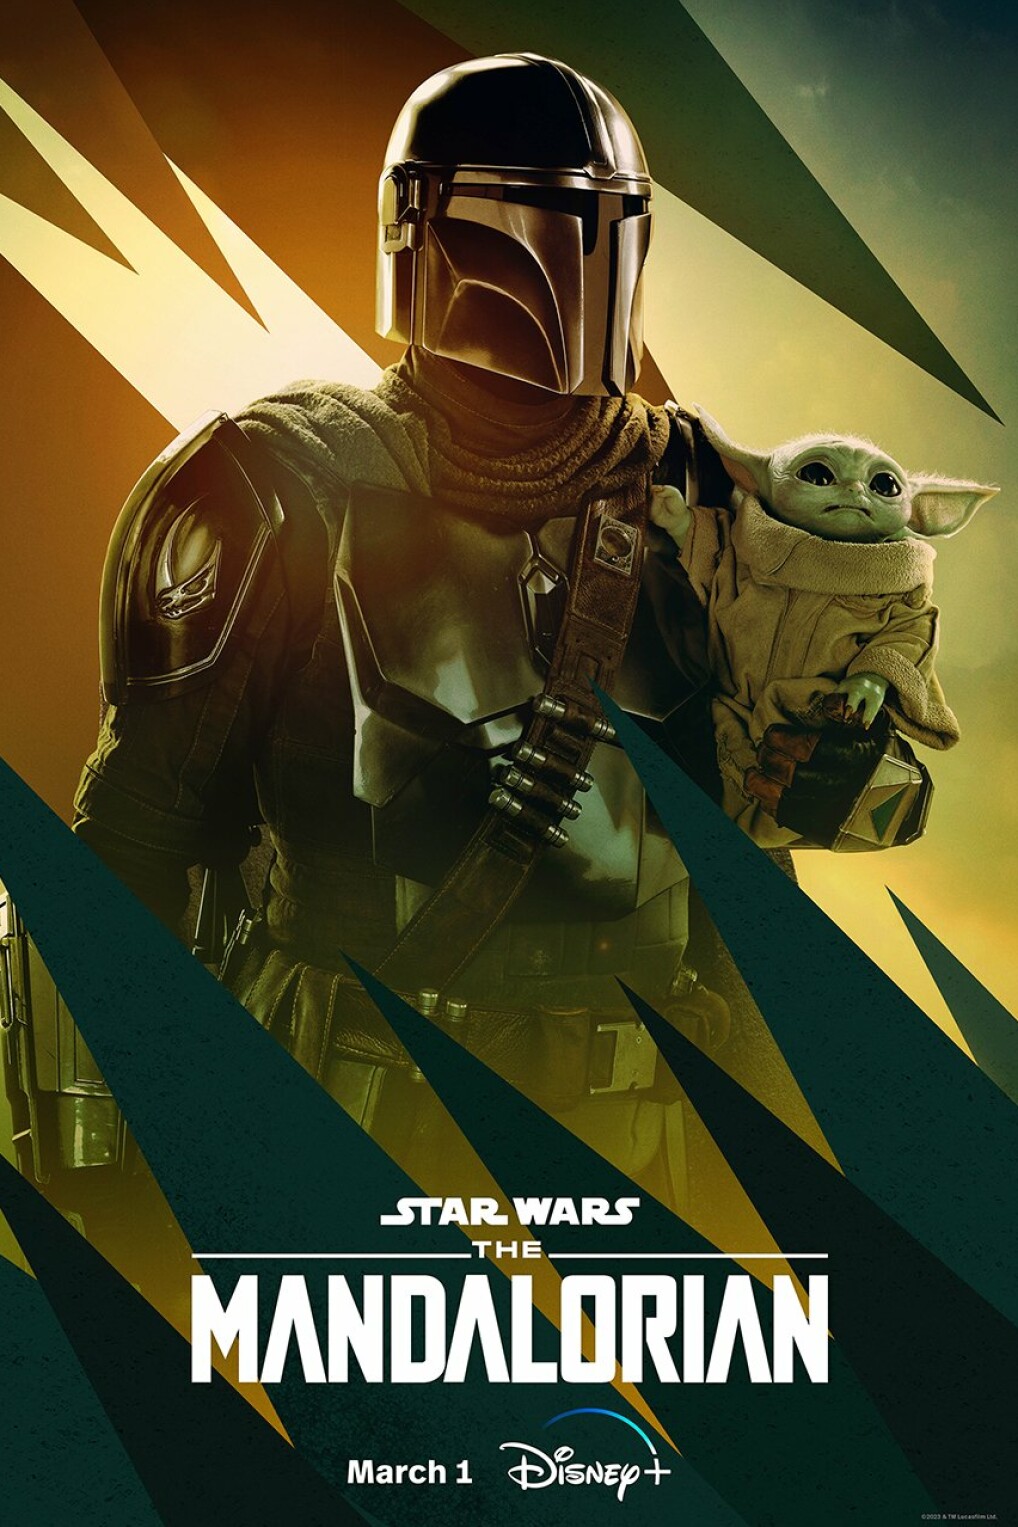 The Mandalorian Season 3: New Character Posters for the Disney+ Series - Image 1 of 3